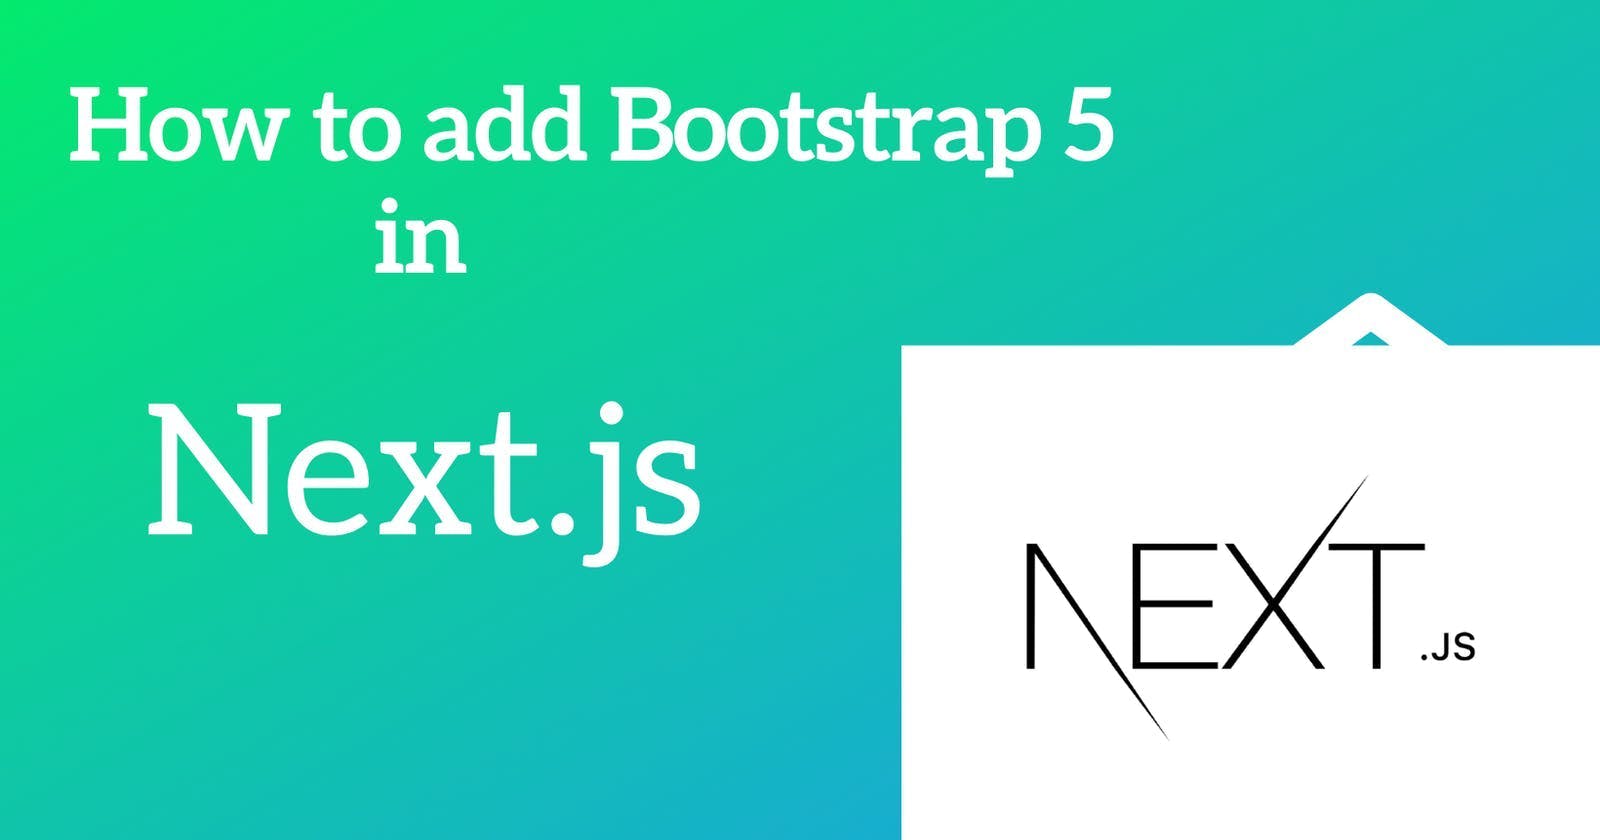 How to add Bootstrap 5 in Next.js